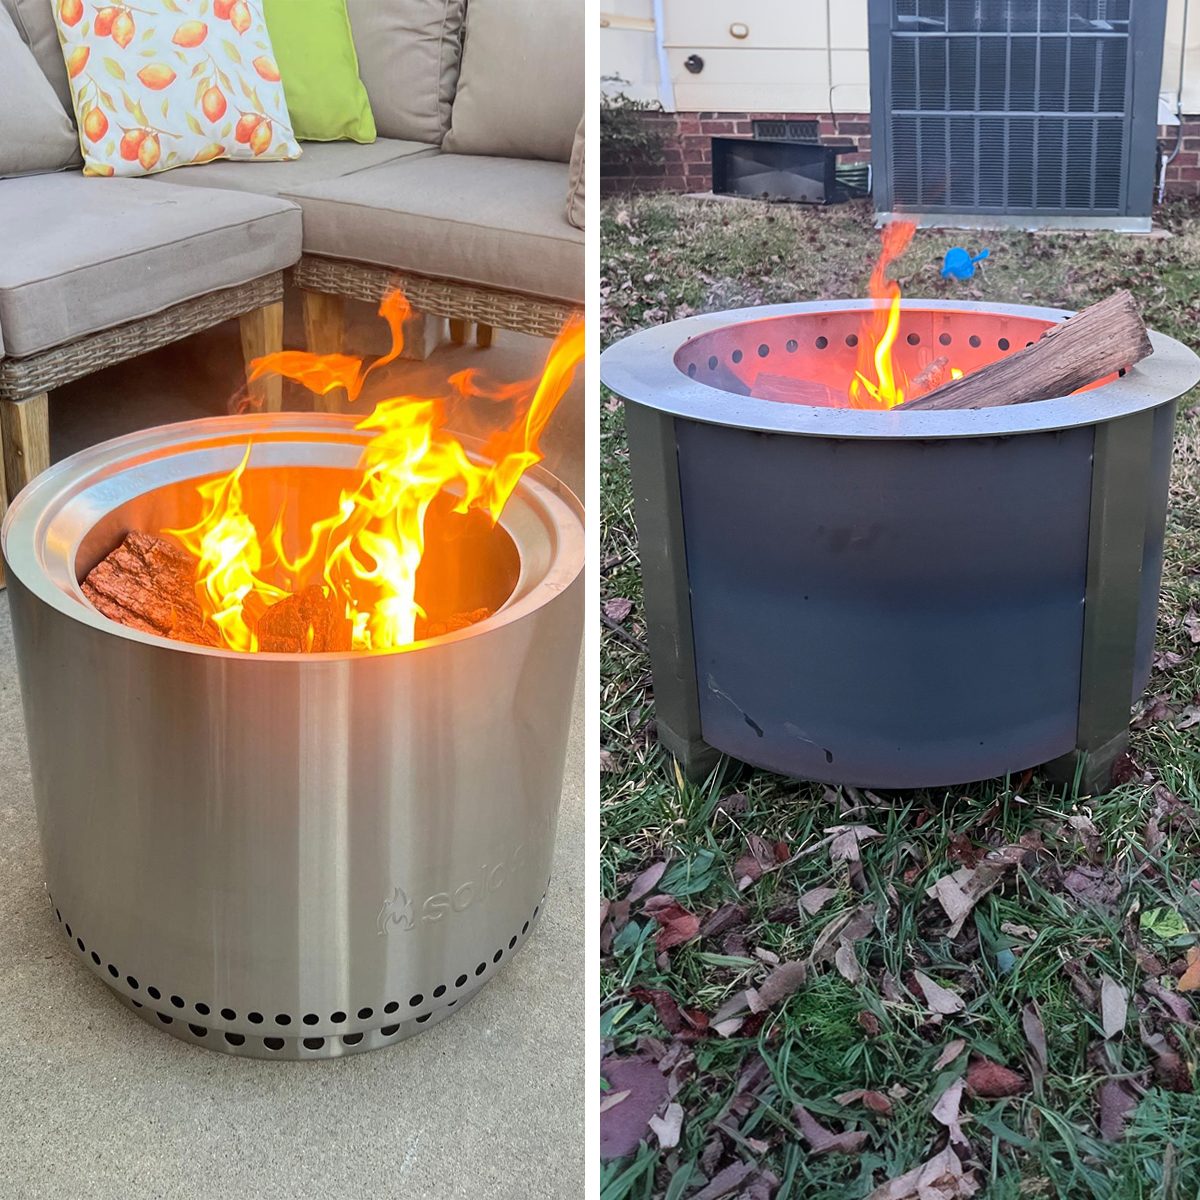 Breeo vs Solo Stove: Which Smokeless Fire Pit Is Better?